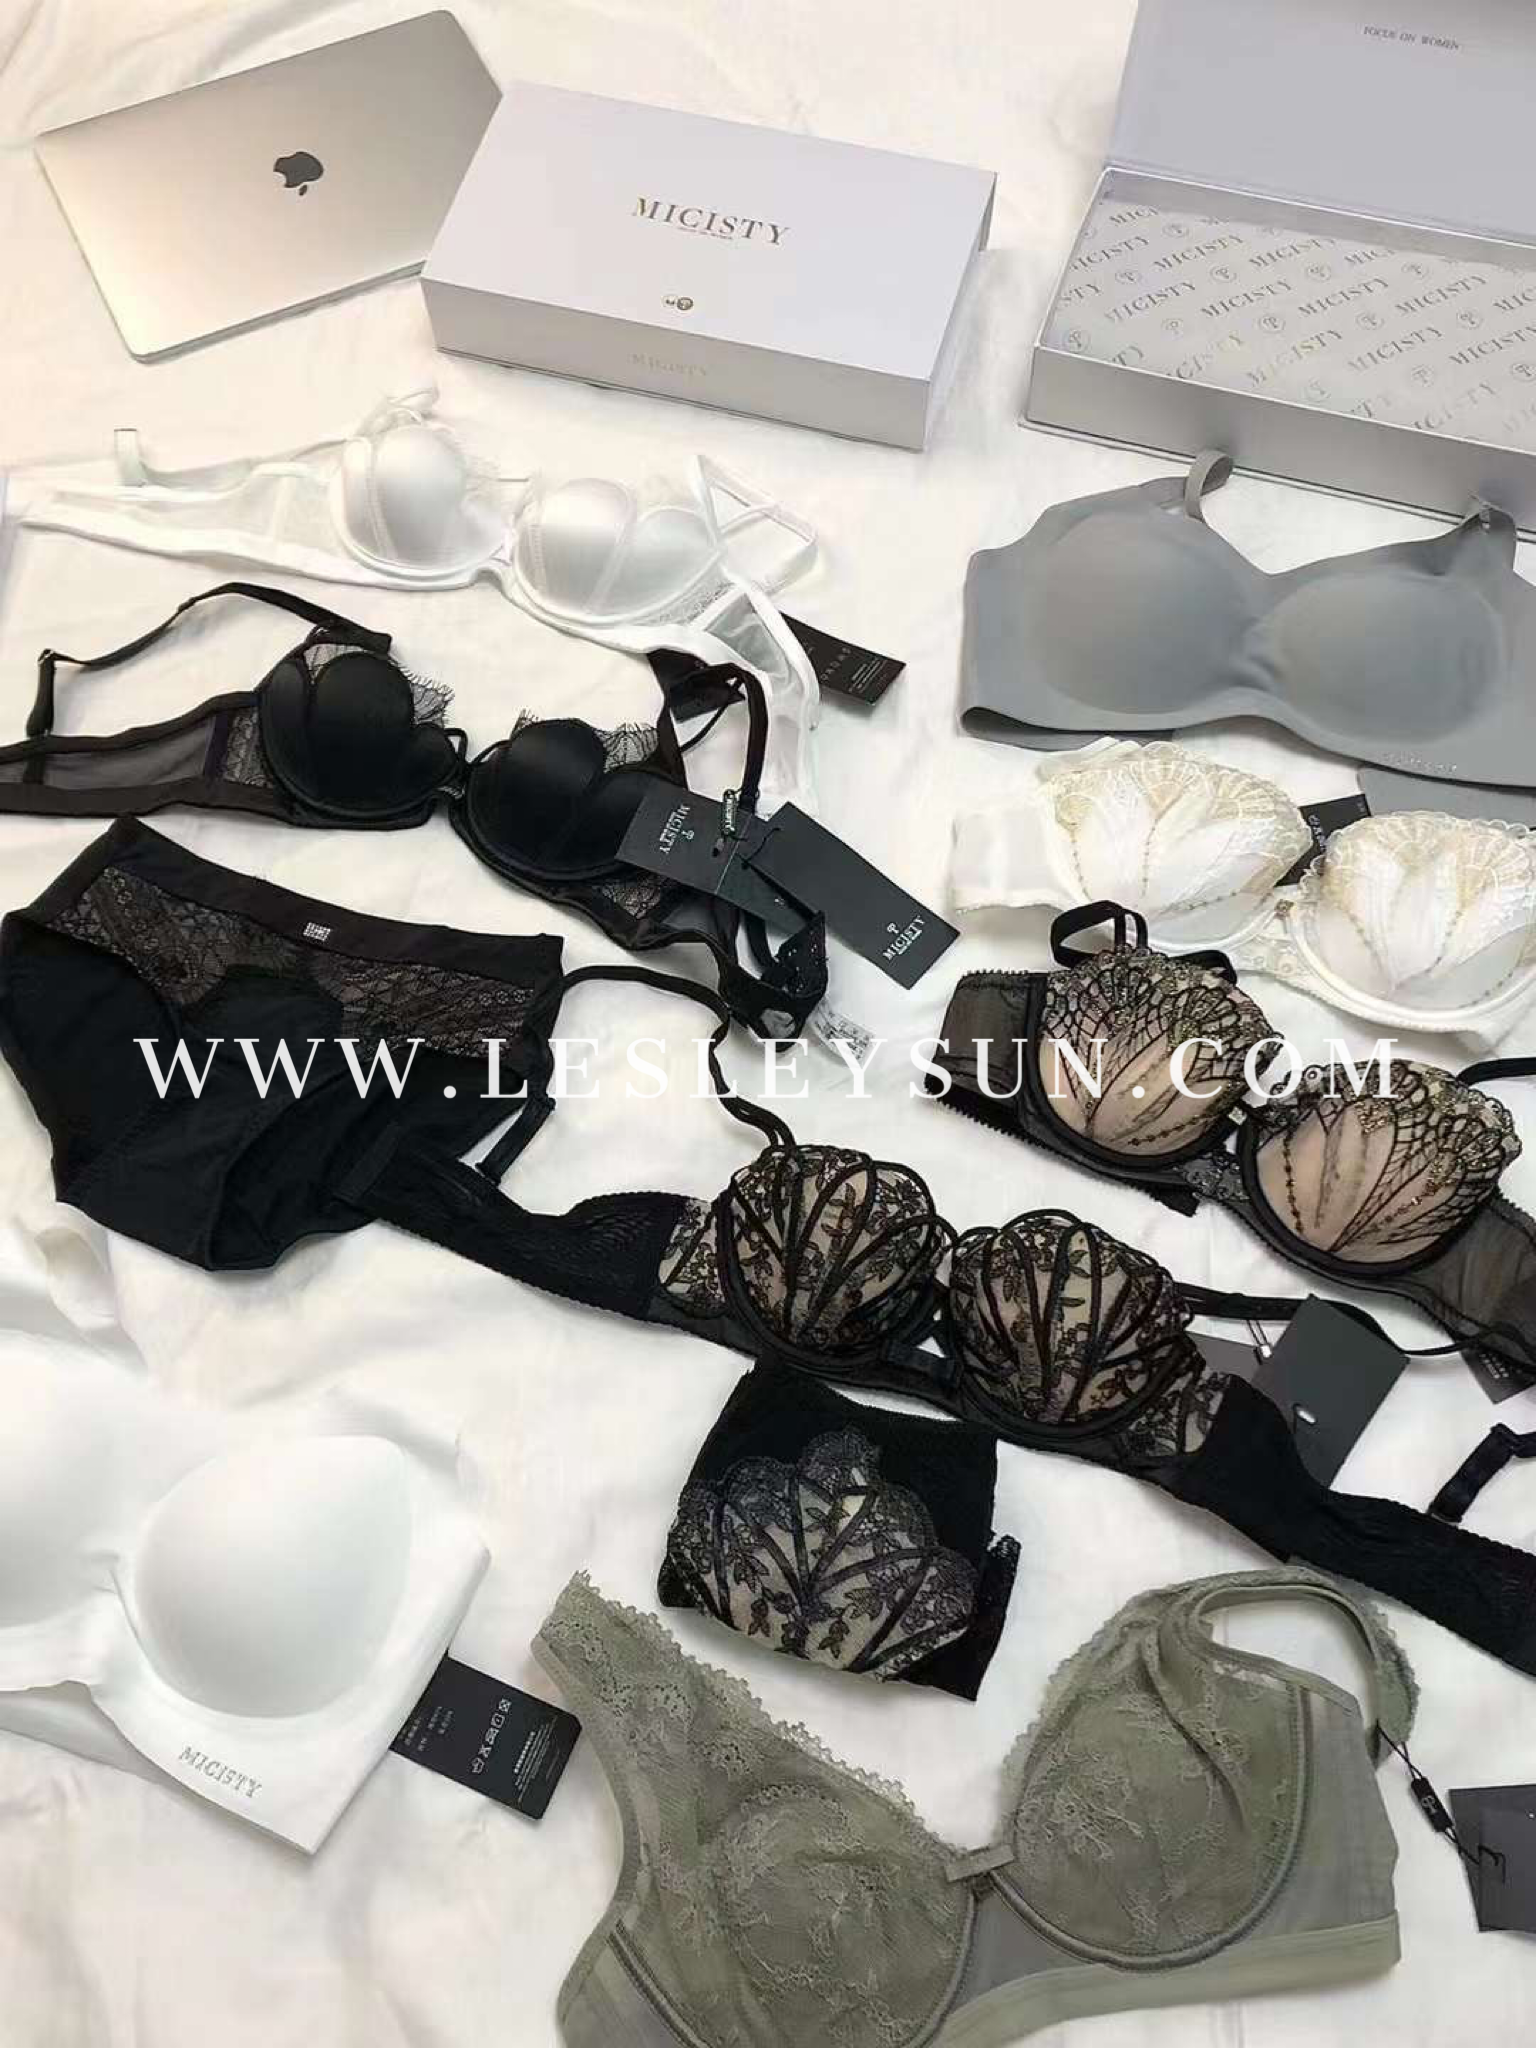 Authentic Micisty Sexy Seashell shape bra  [Due to hygiene concerns, no exchange is permissible]